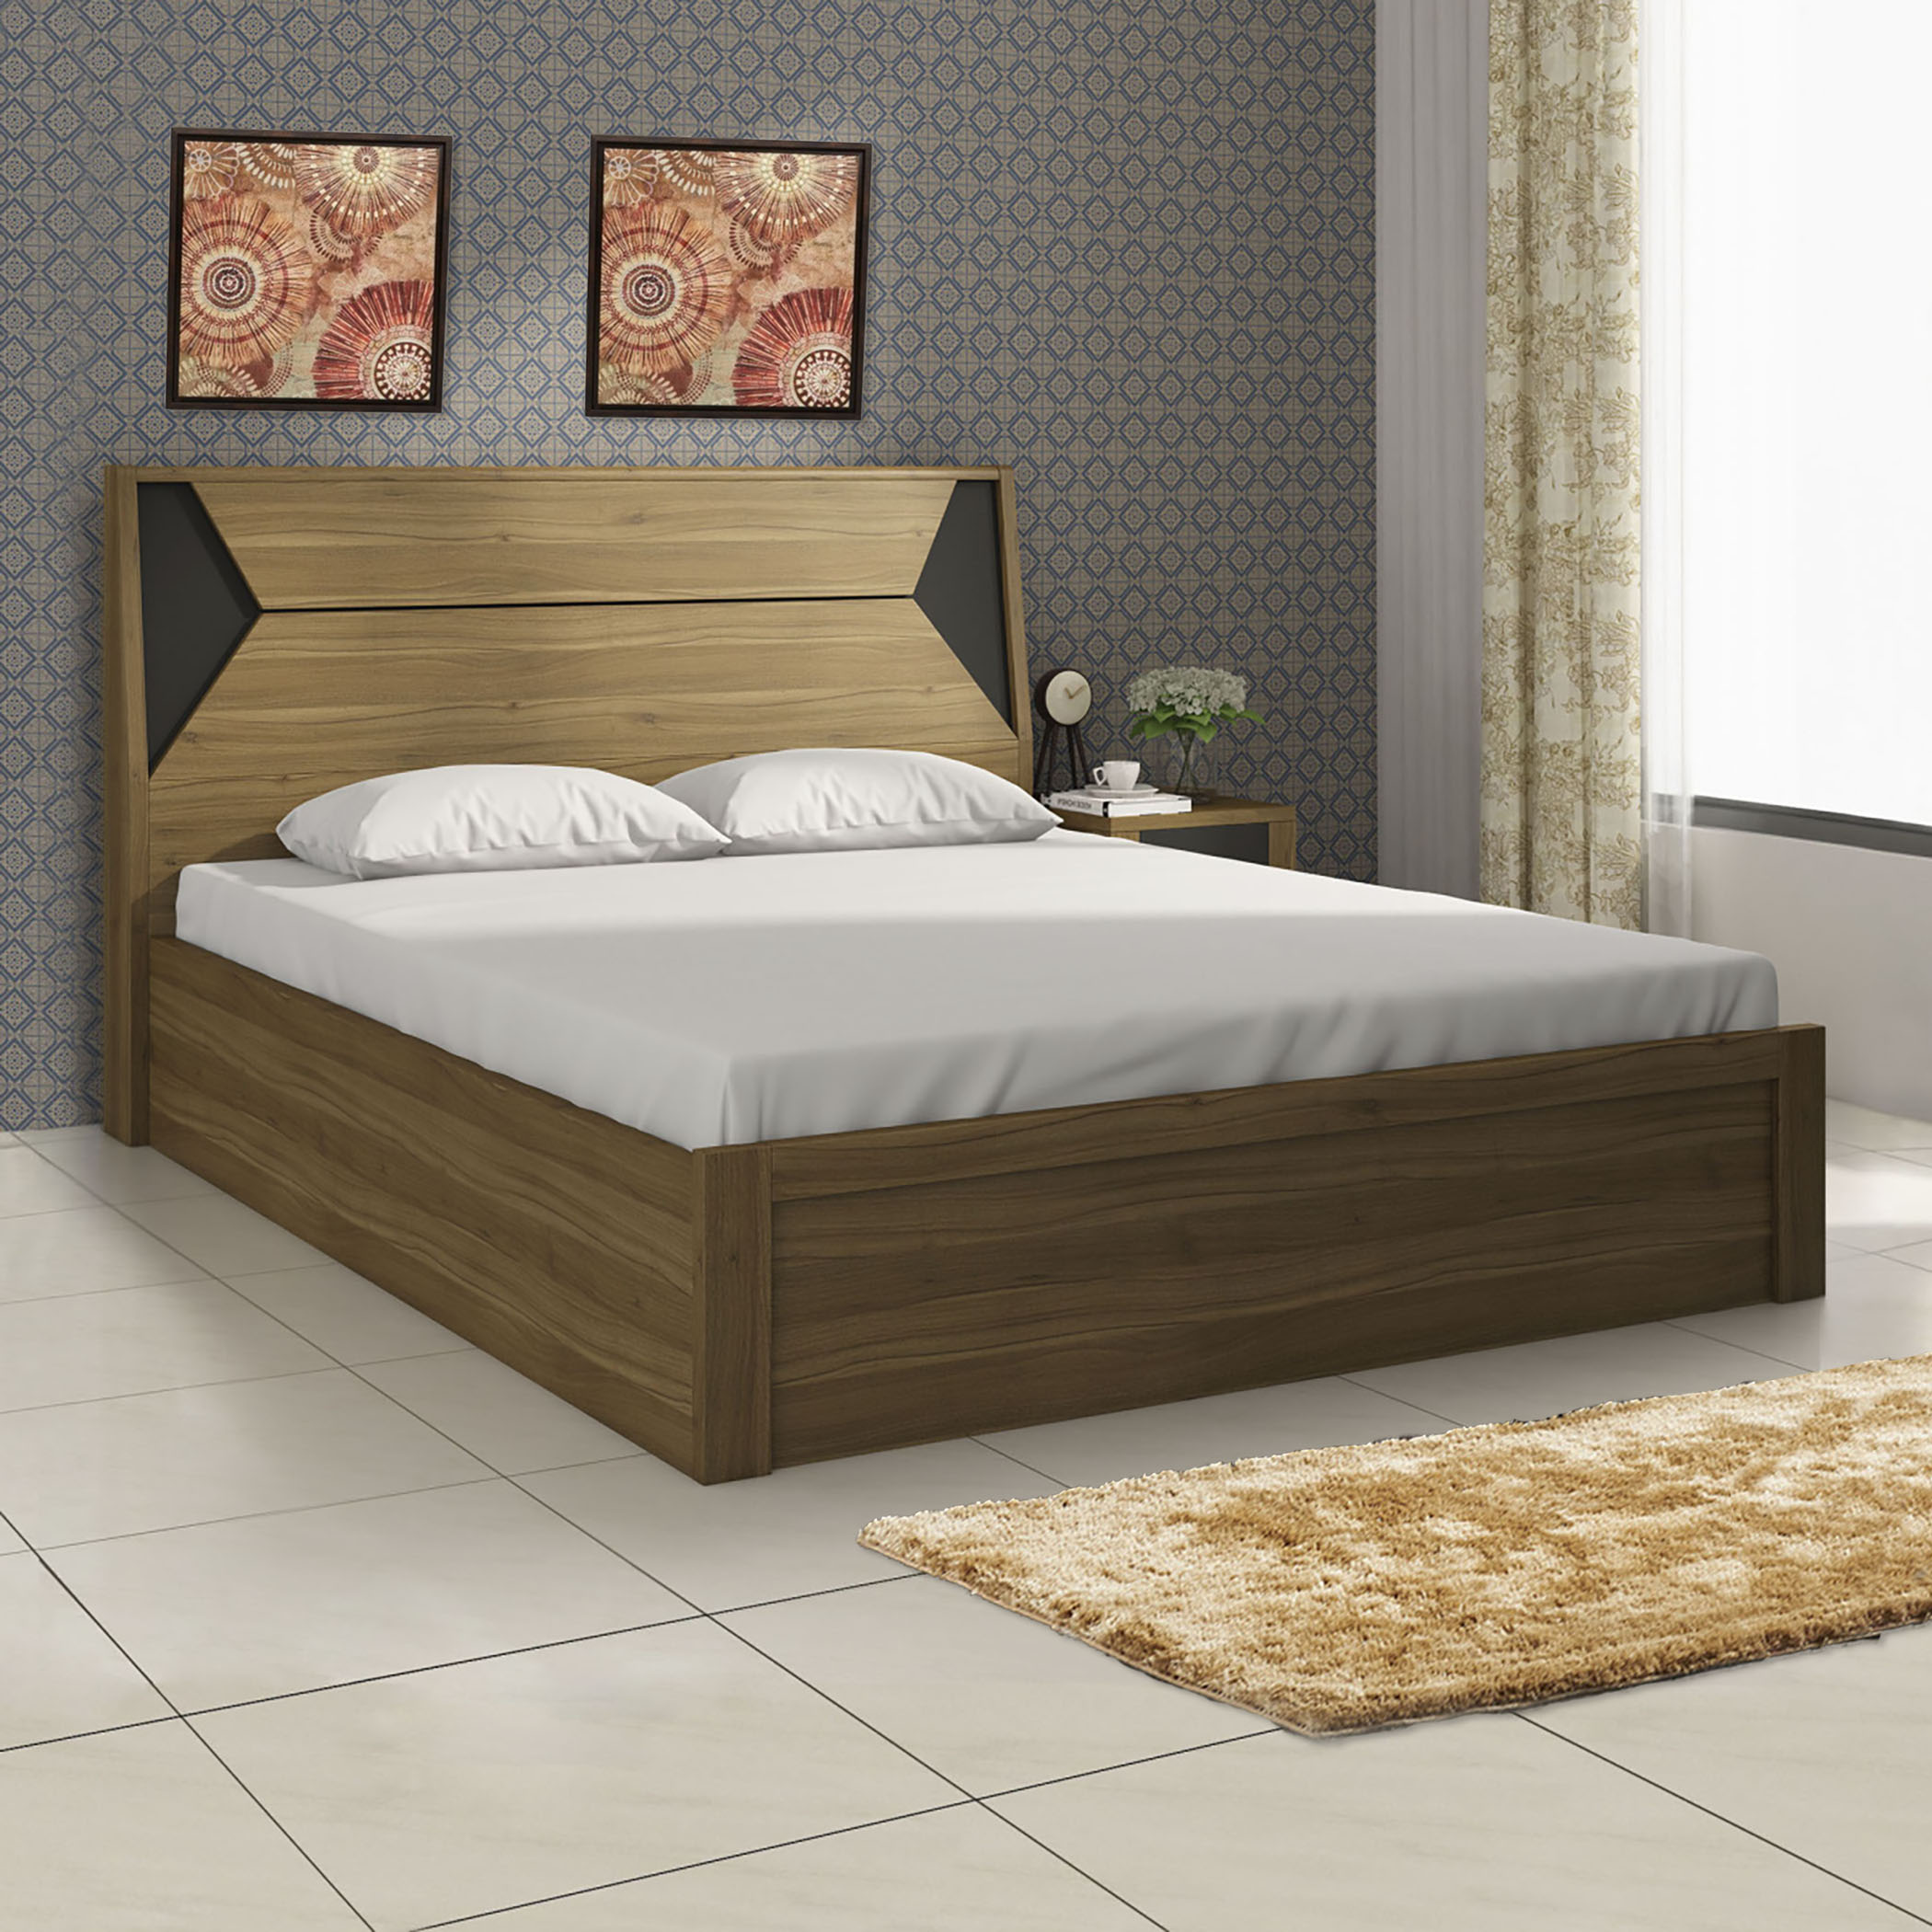 Quadro Edge Queen Bed with Hydraulic Storage - Brown